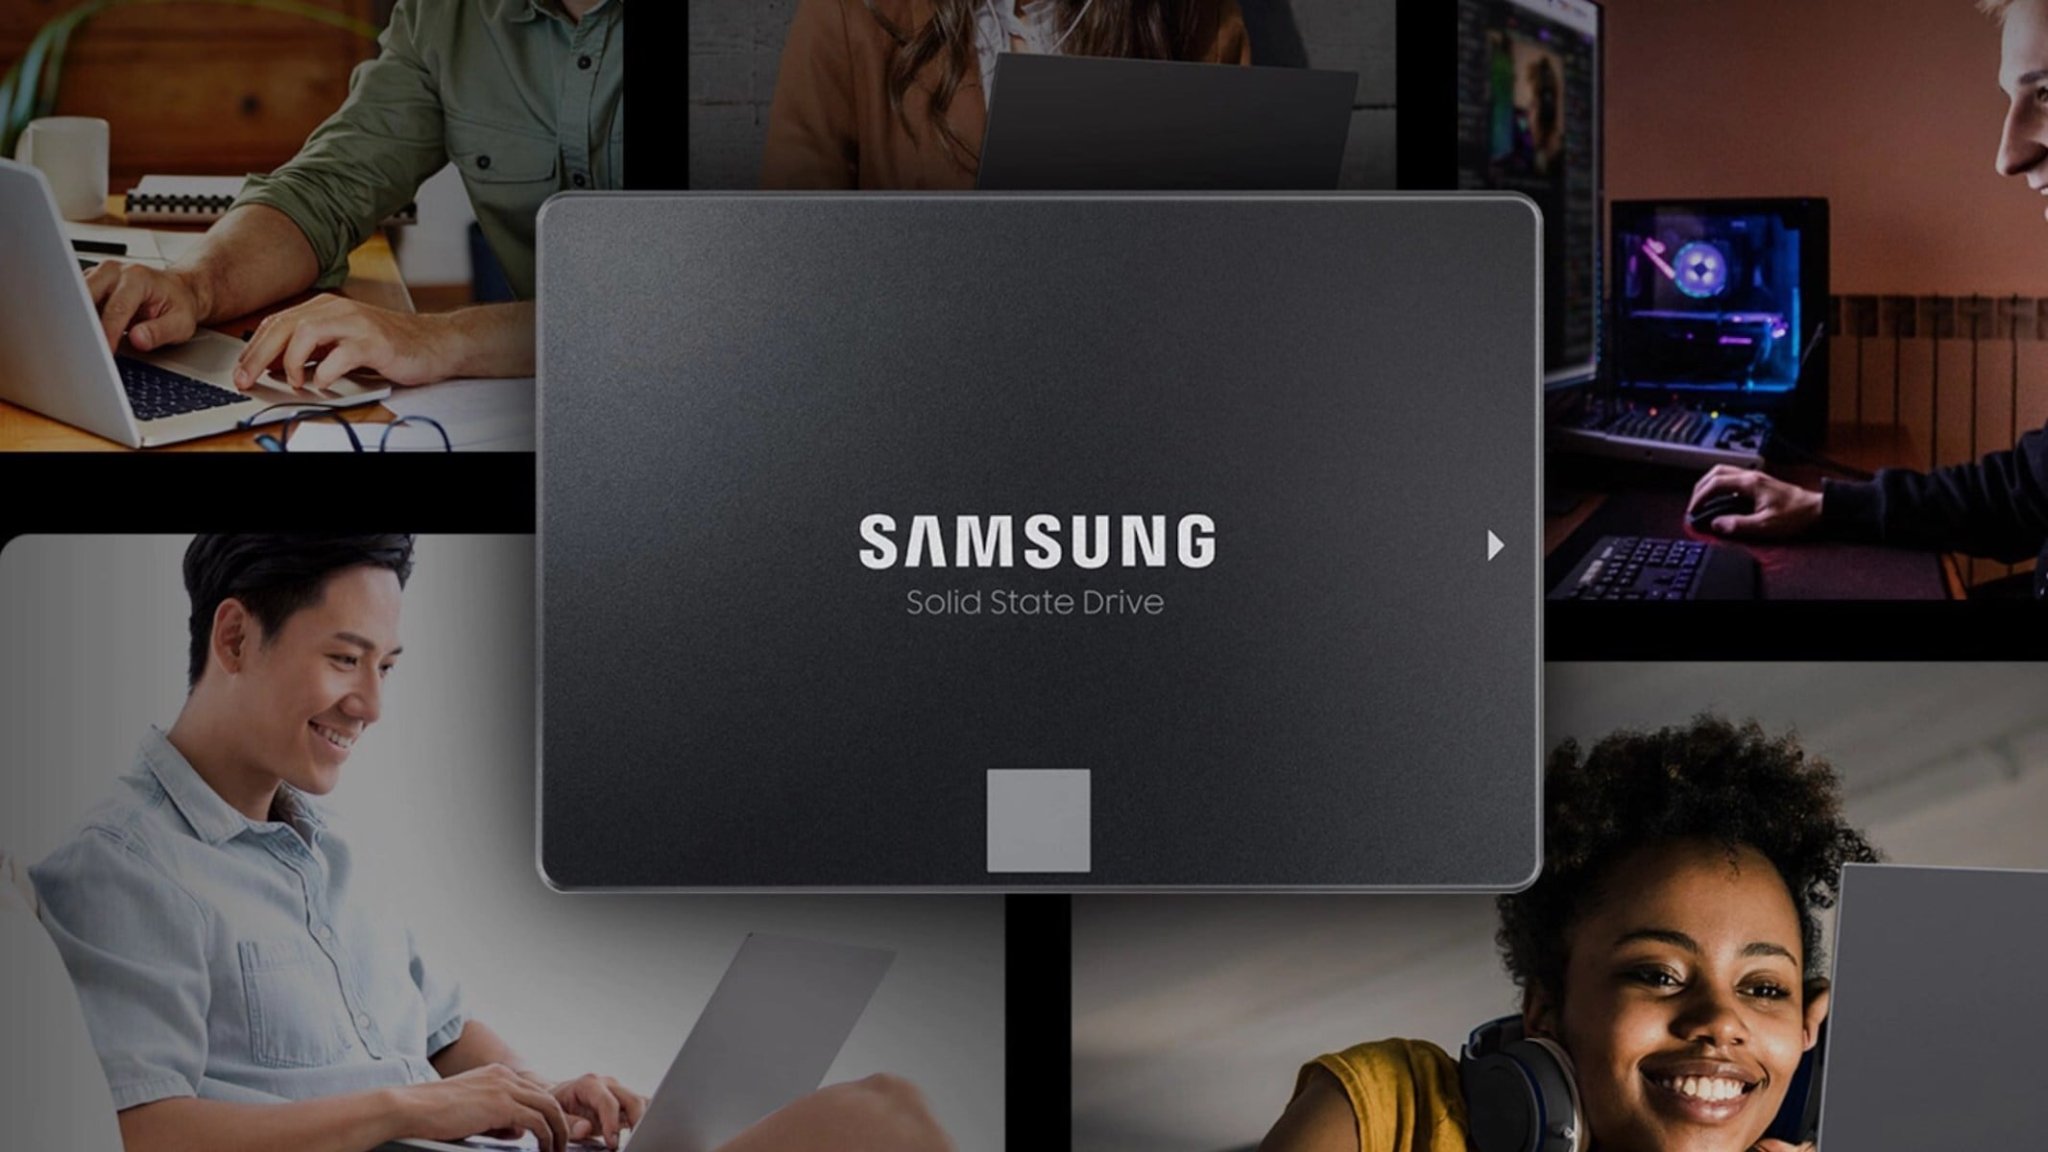 Samsung’s 870 Evo is the entry-level SSD you can’t say no to